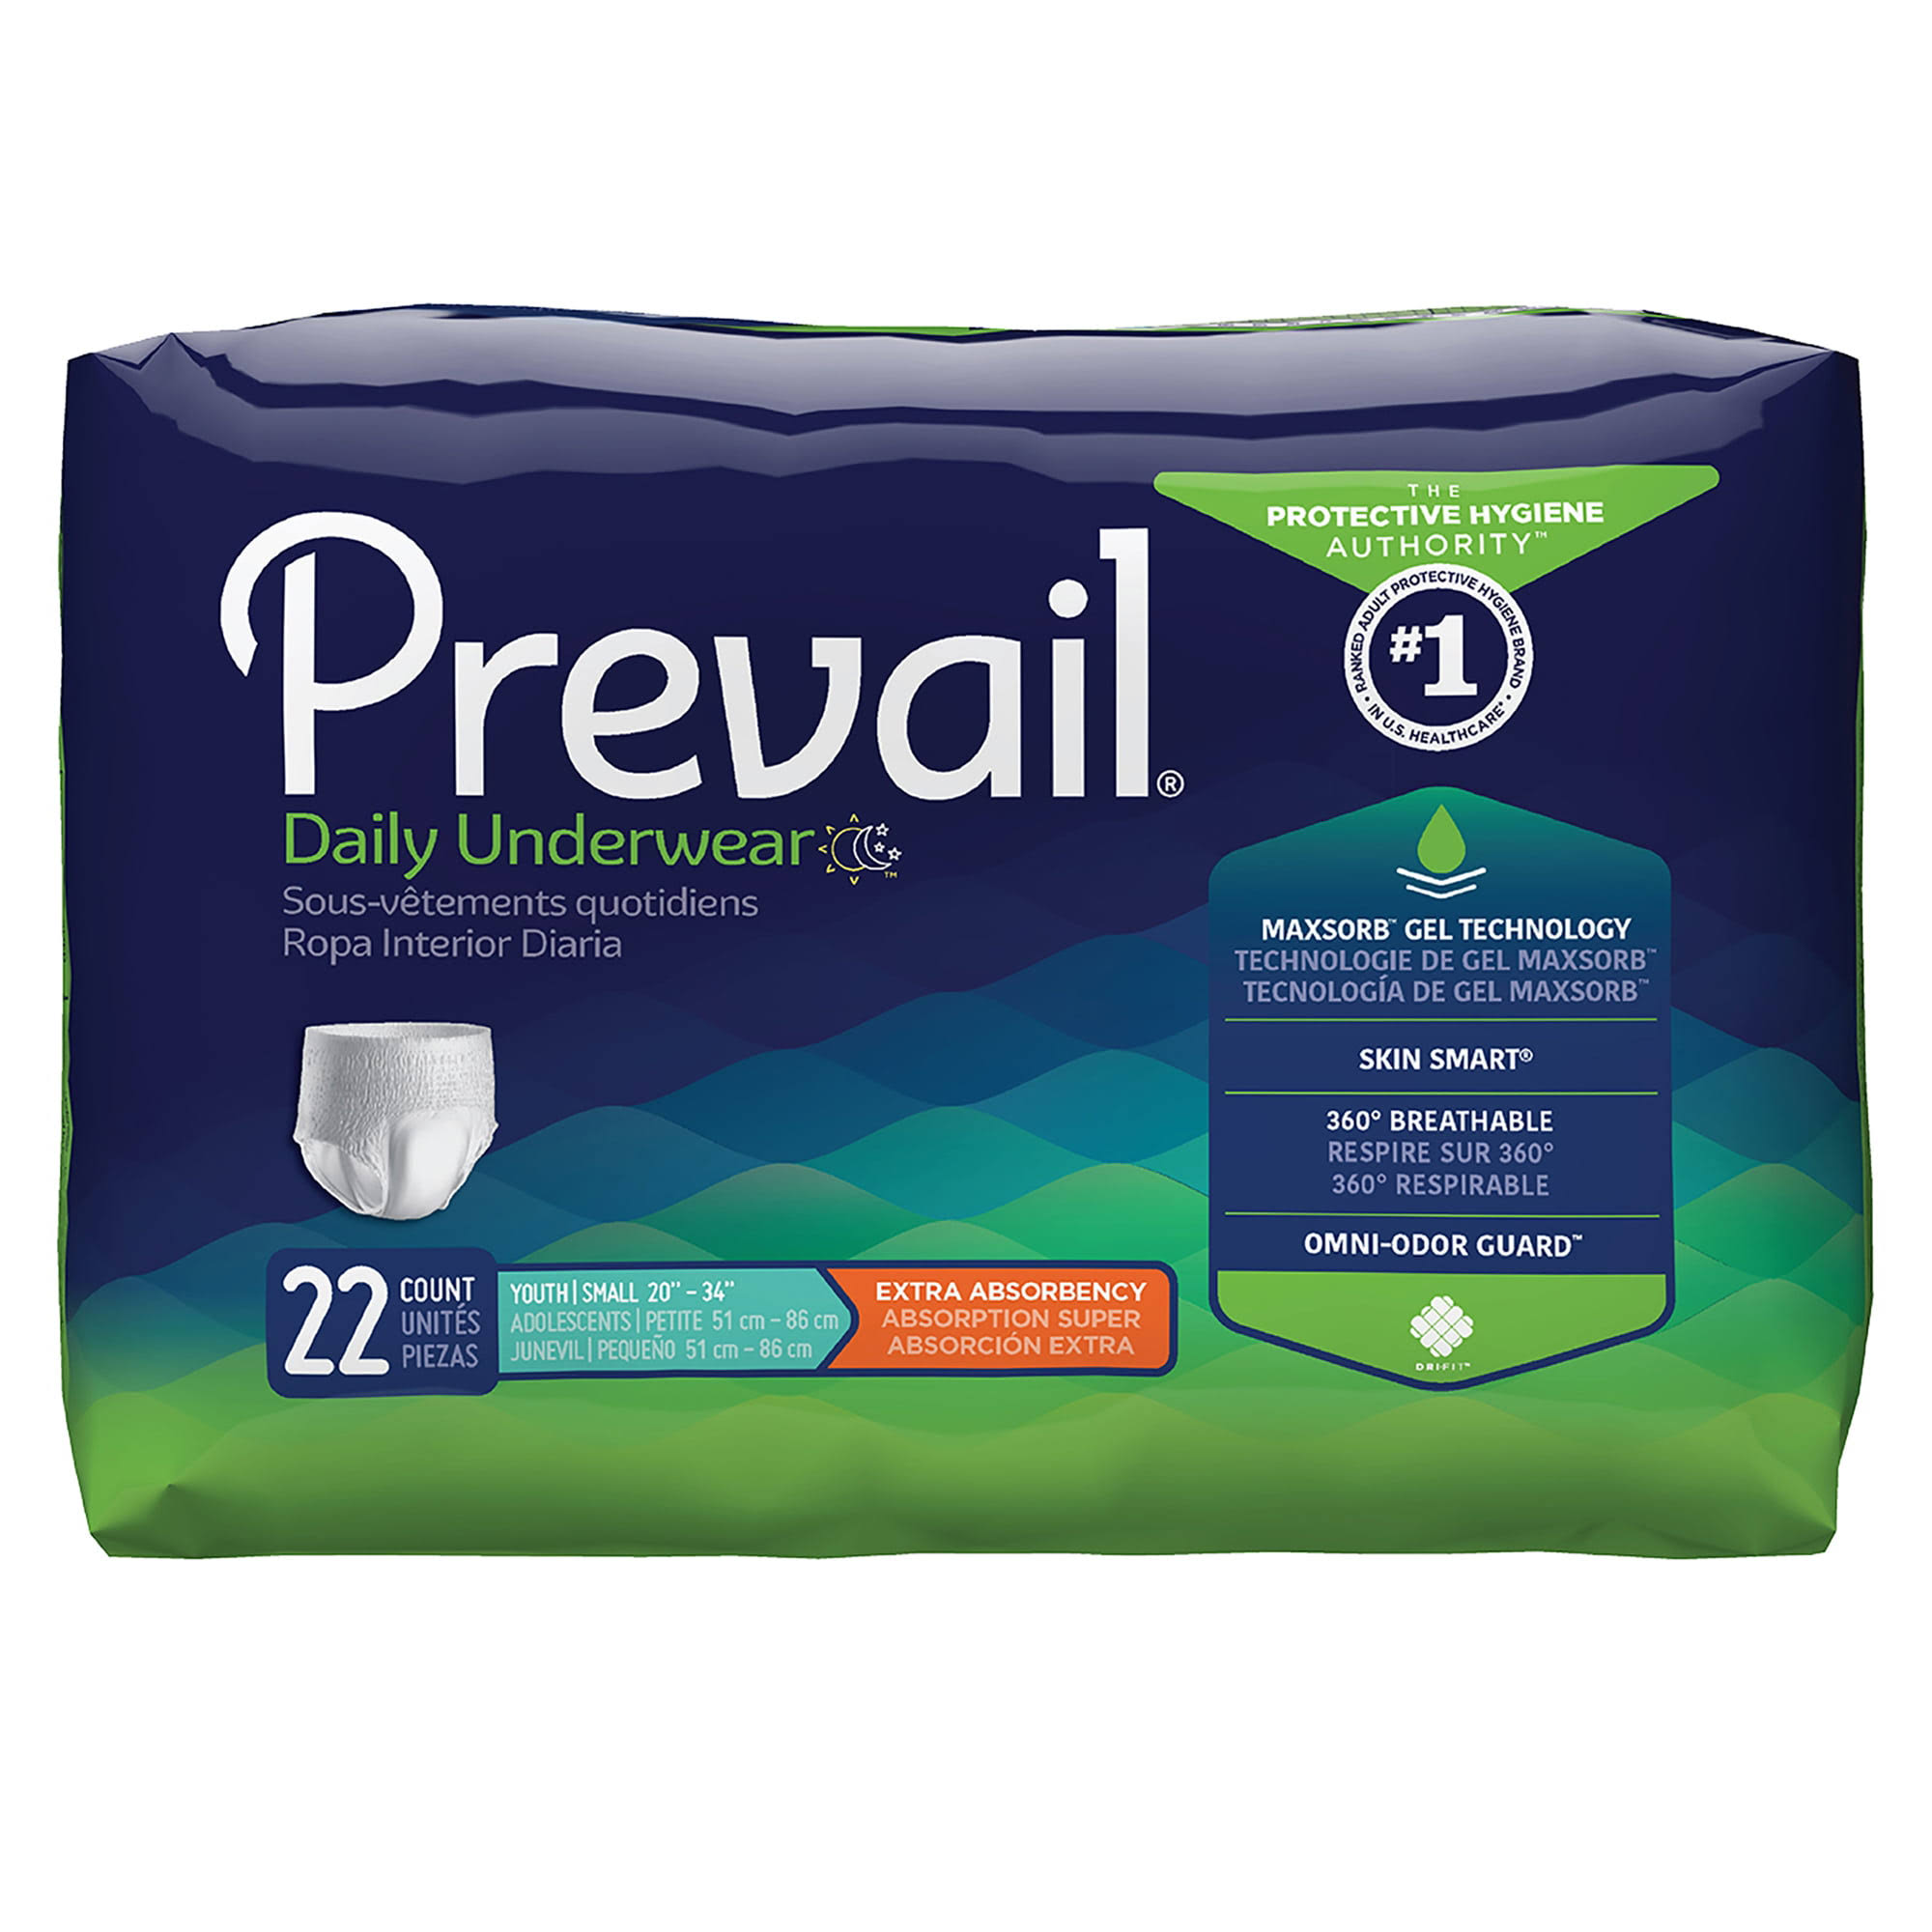 Prevail Extra Absorbency Underwear - Youth/Small Adult, 22 ct